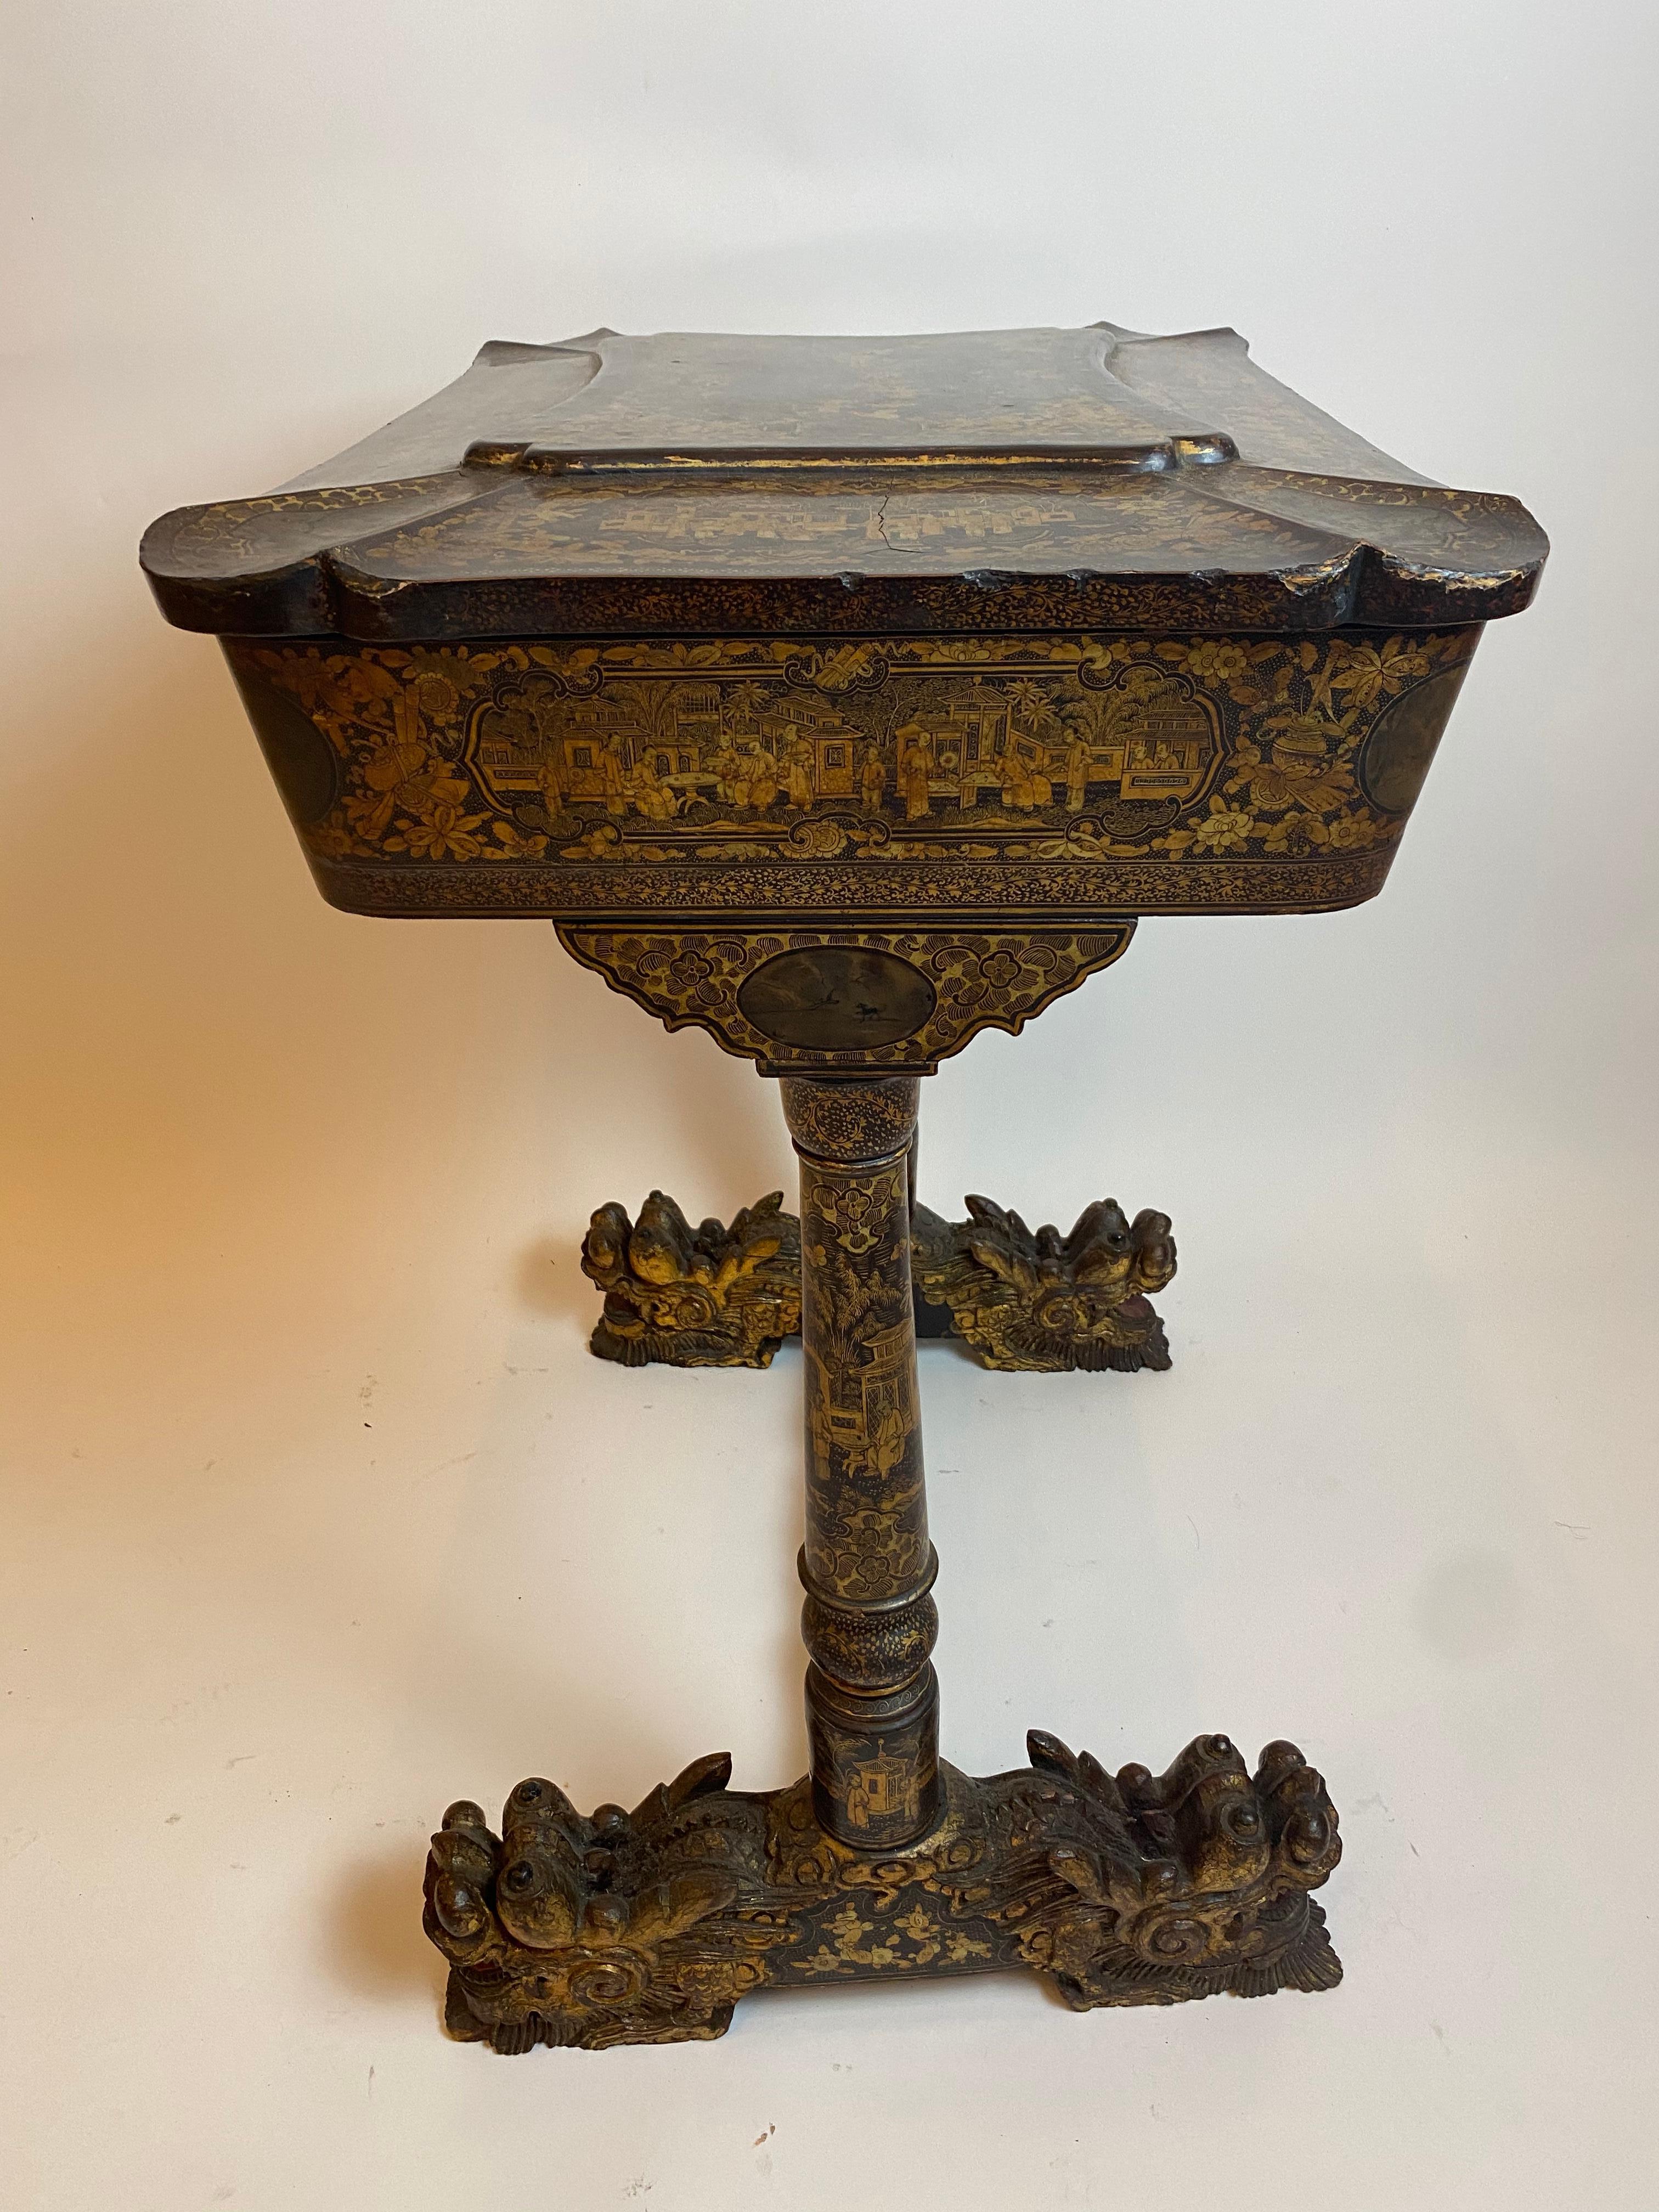 Early 19th Century Chinese Export Lacquer and Gilt Work Table For Sale 8